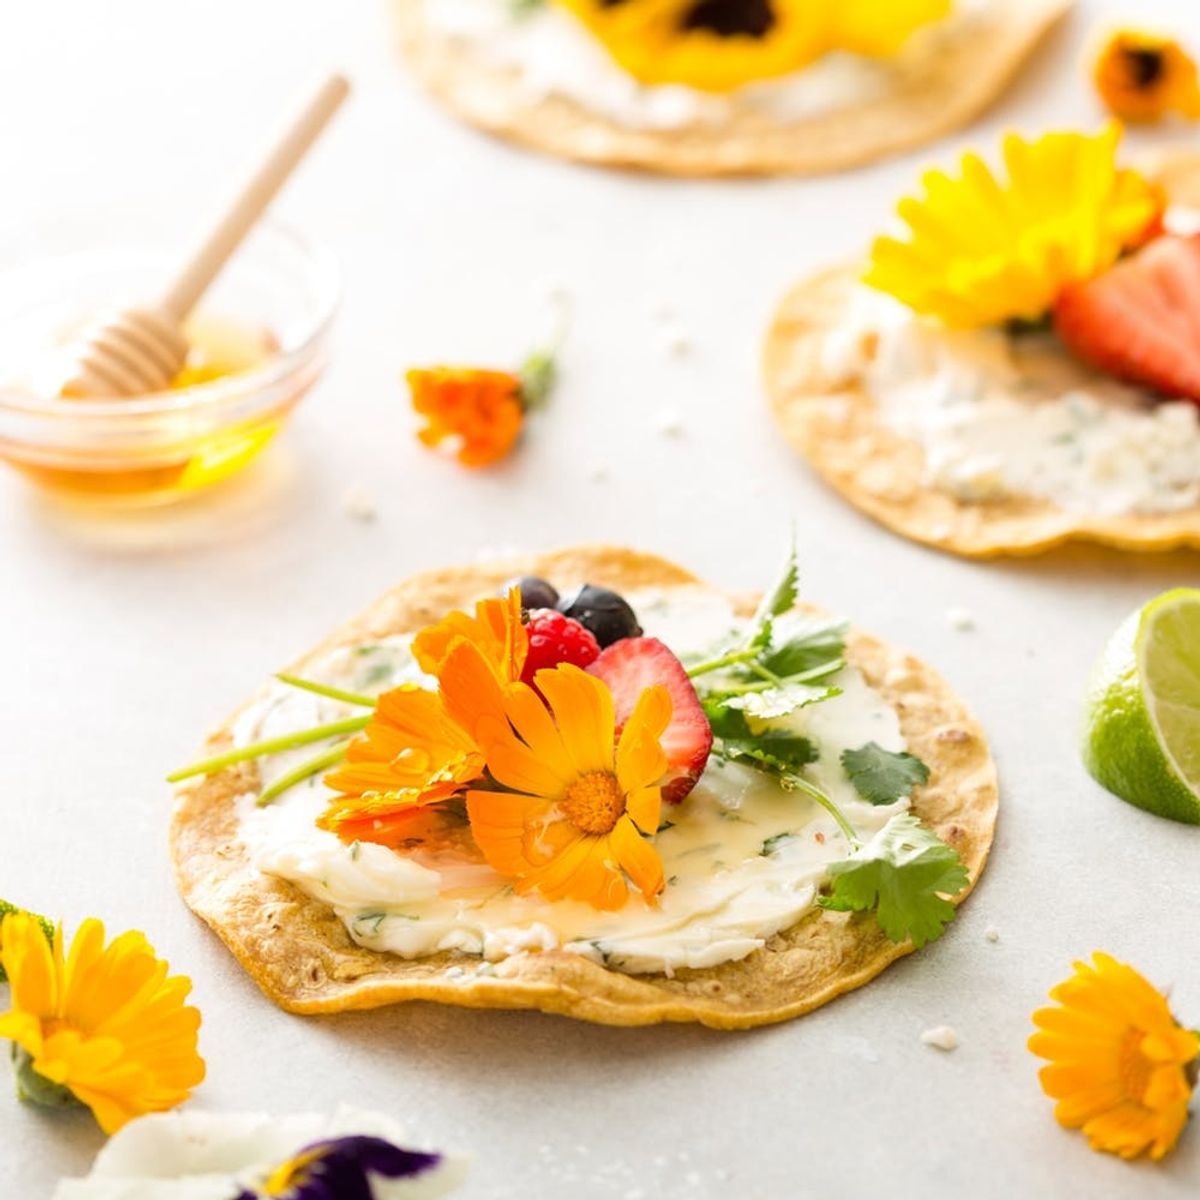 Make Your Own Edible Art Pieces With This Floral Taco Recipe